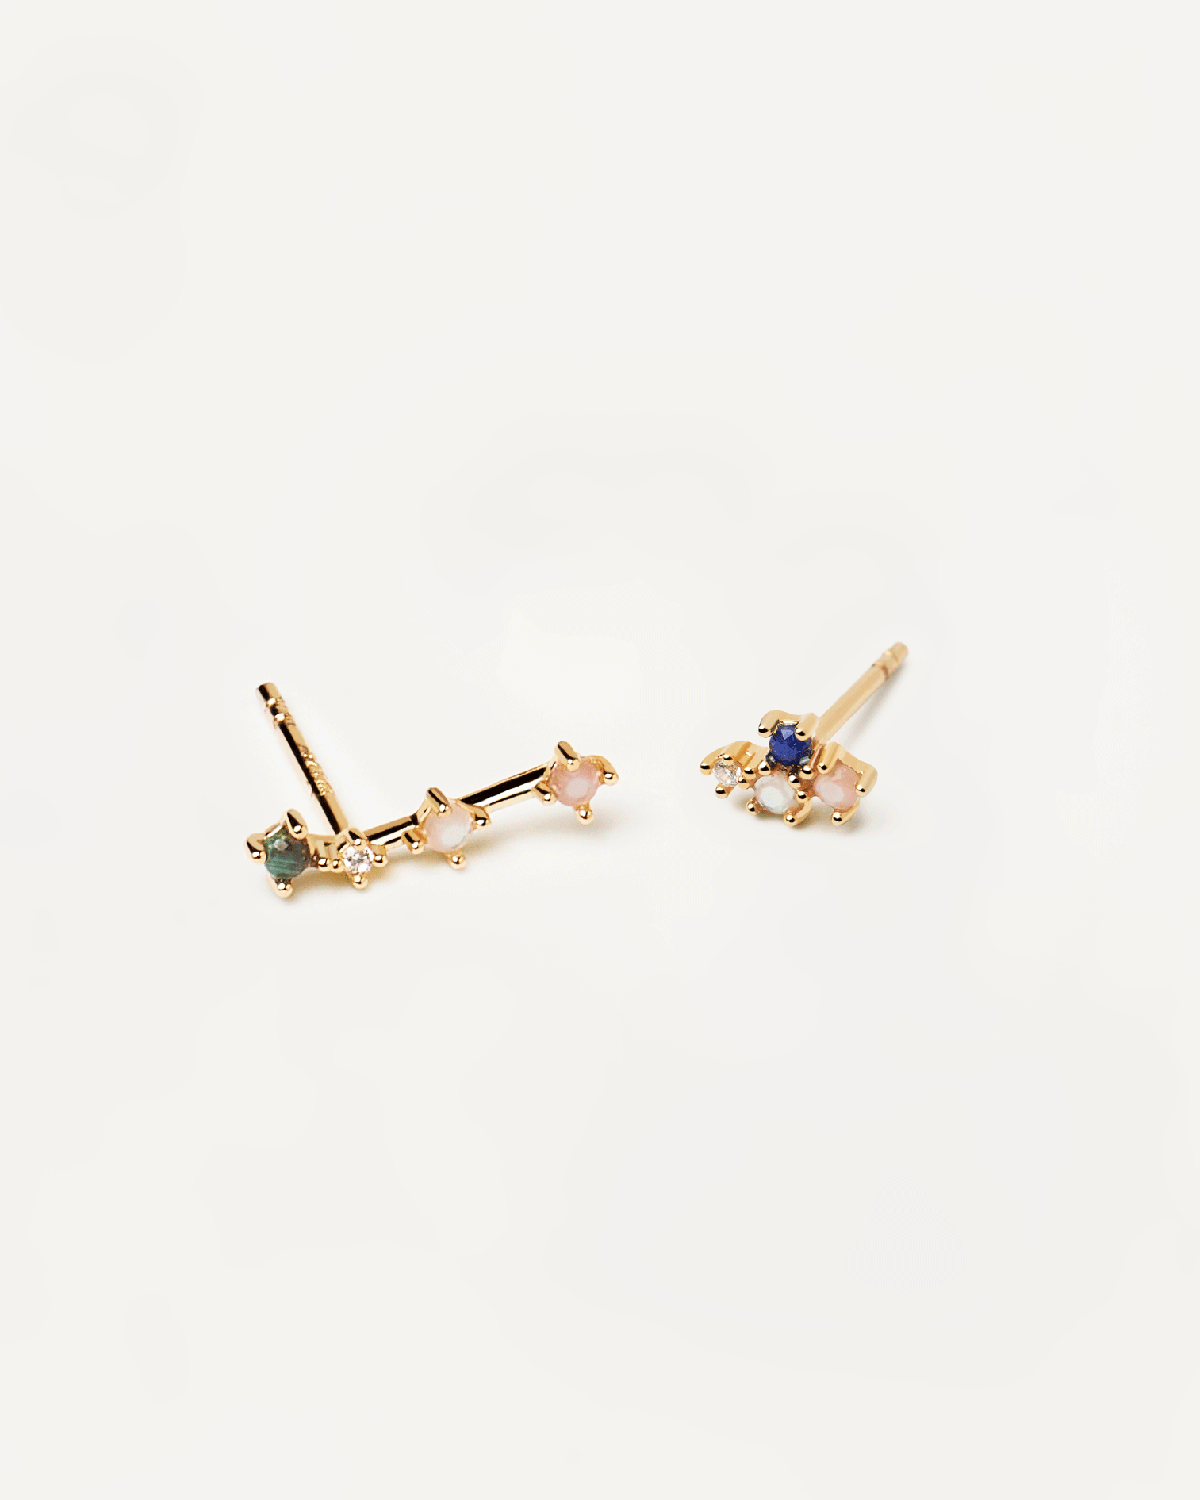 2021 Selection | Aries Earrings. Get the latest arrival from PDPAOLA. Place your order safely and get this Best Seller. Free Shipping over 70€